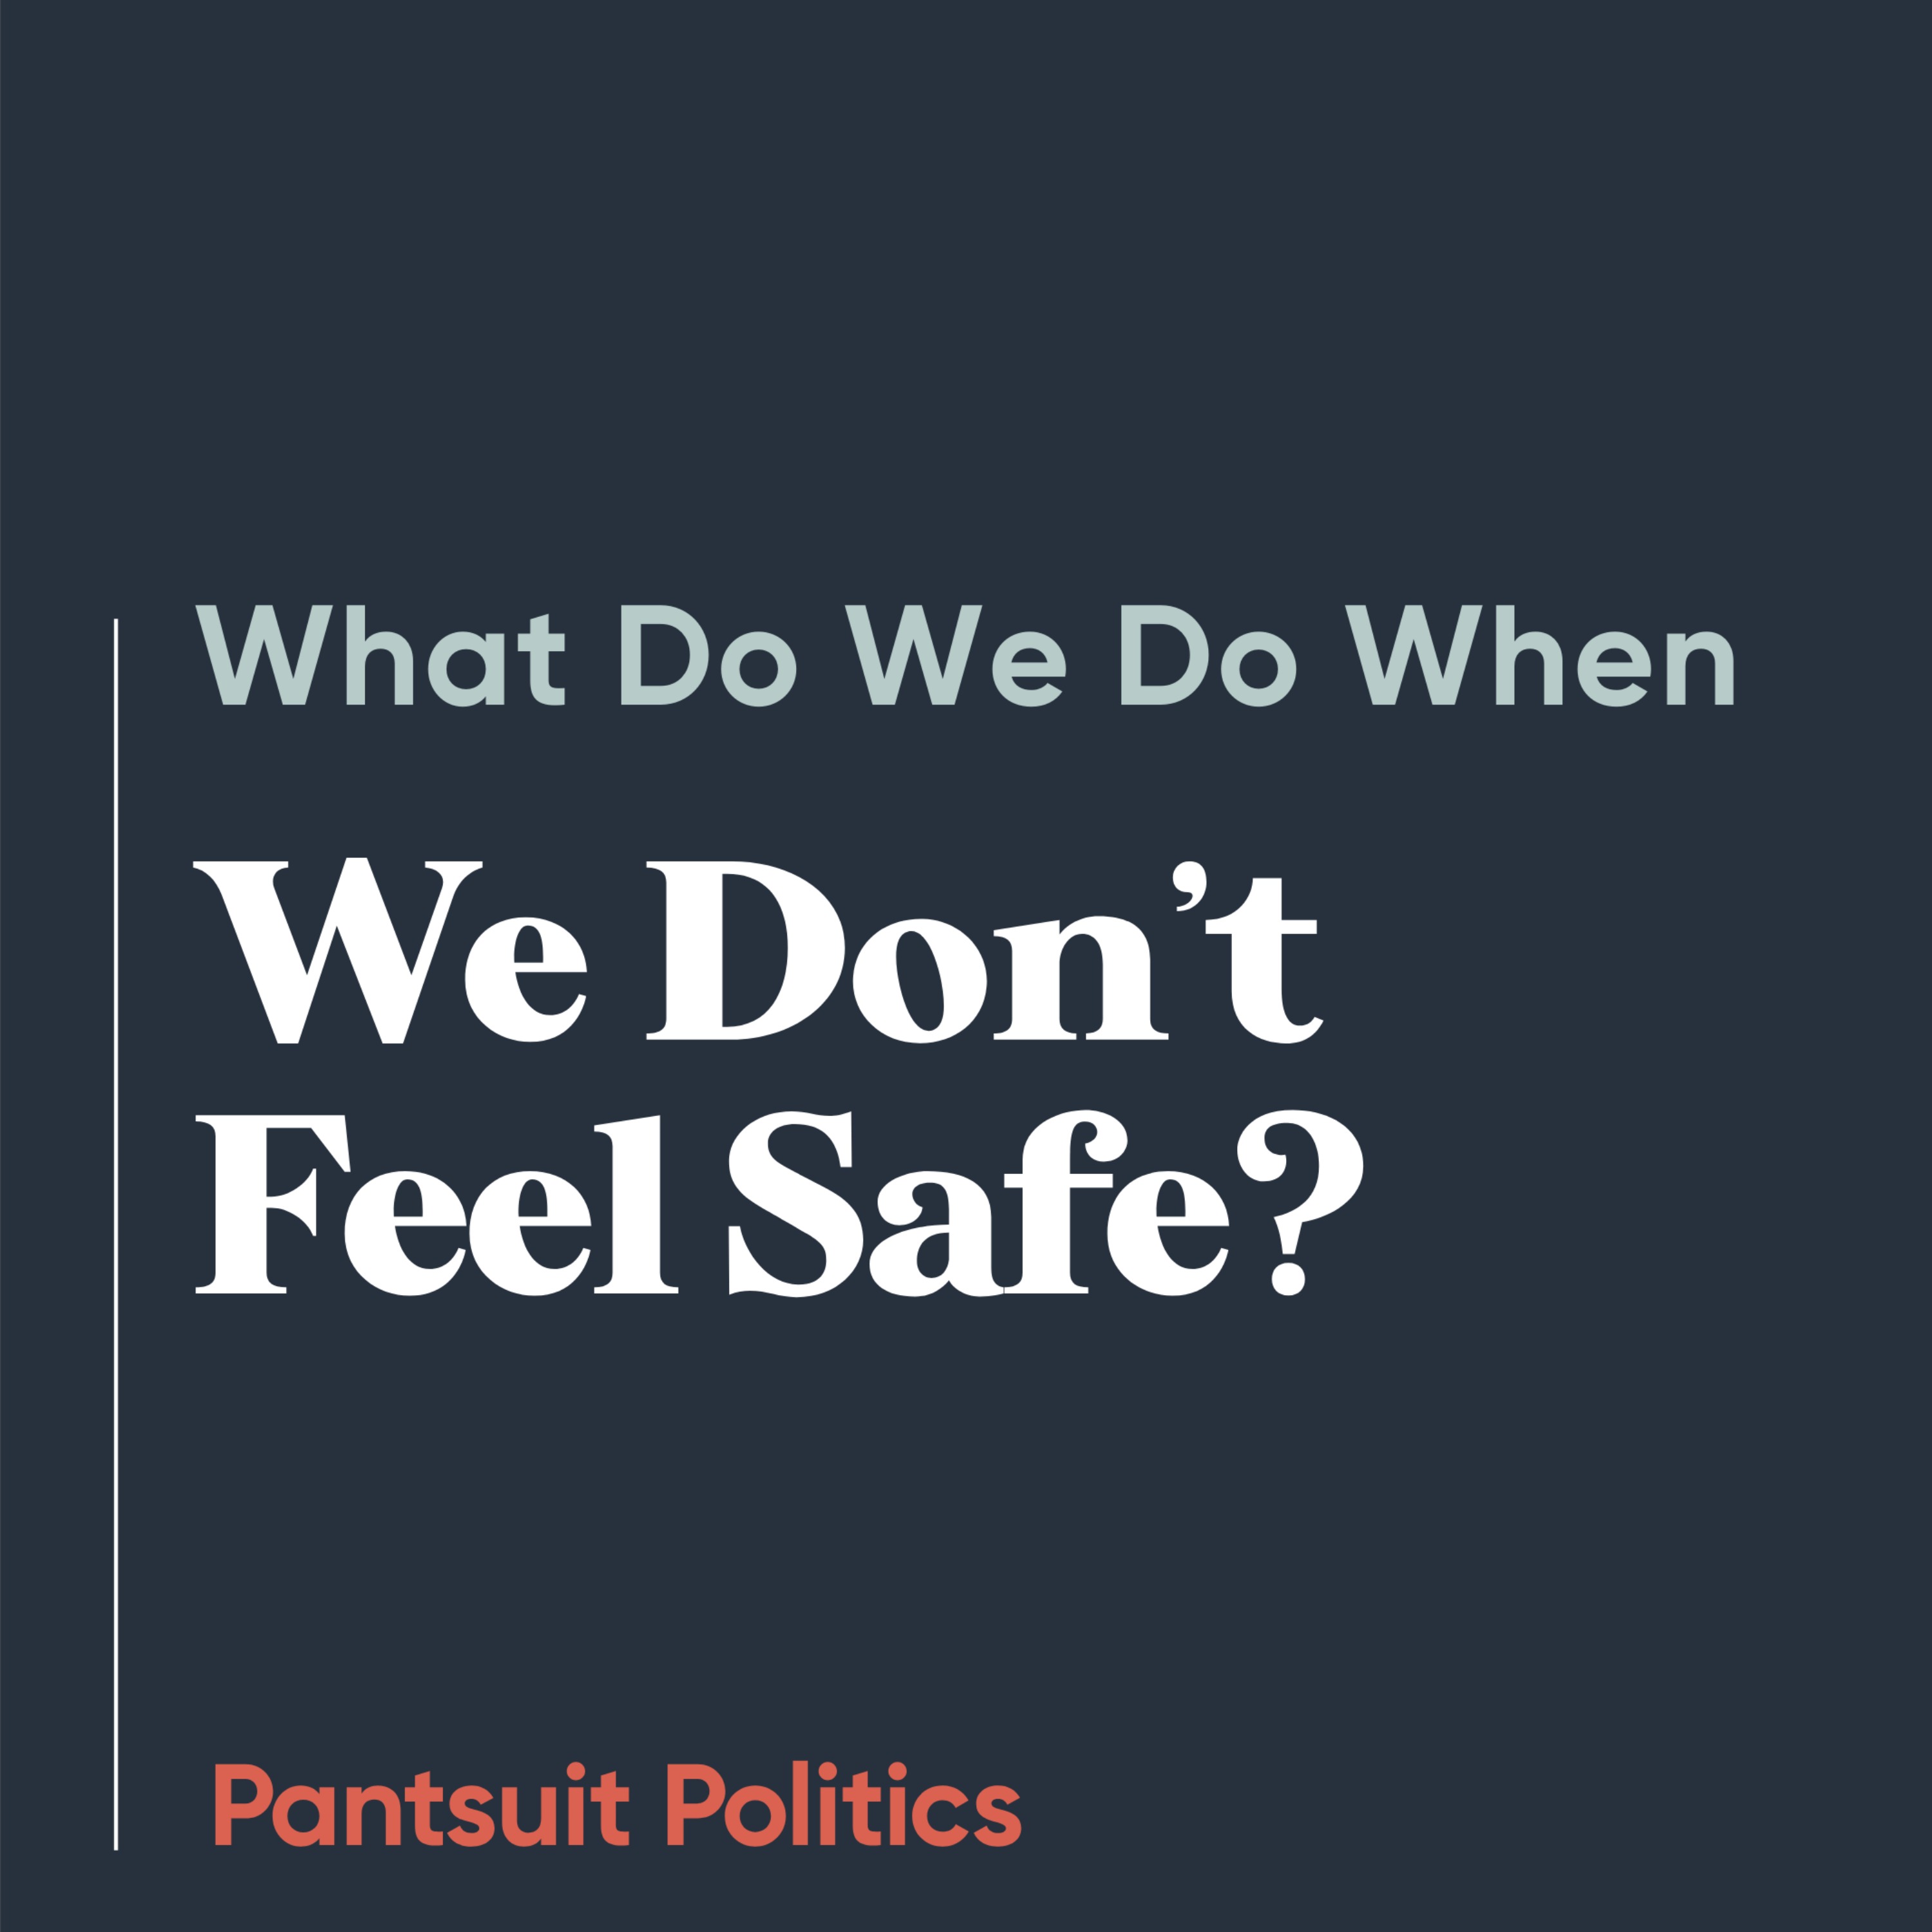 What Do We Do When We Don't Feel Safe?